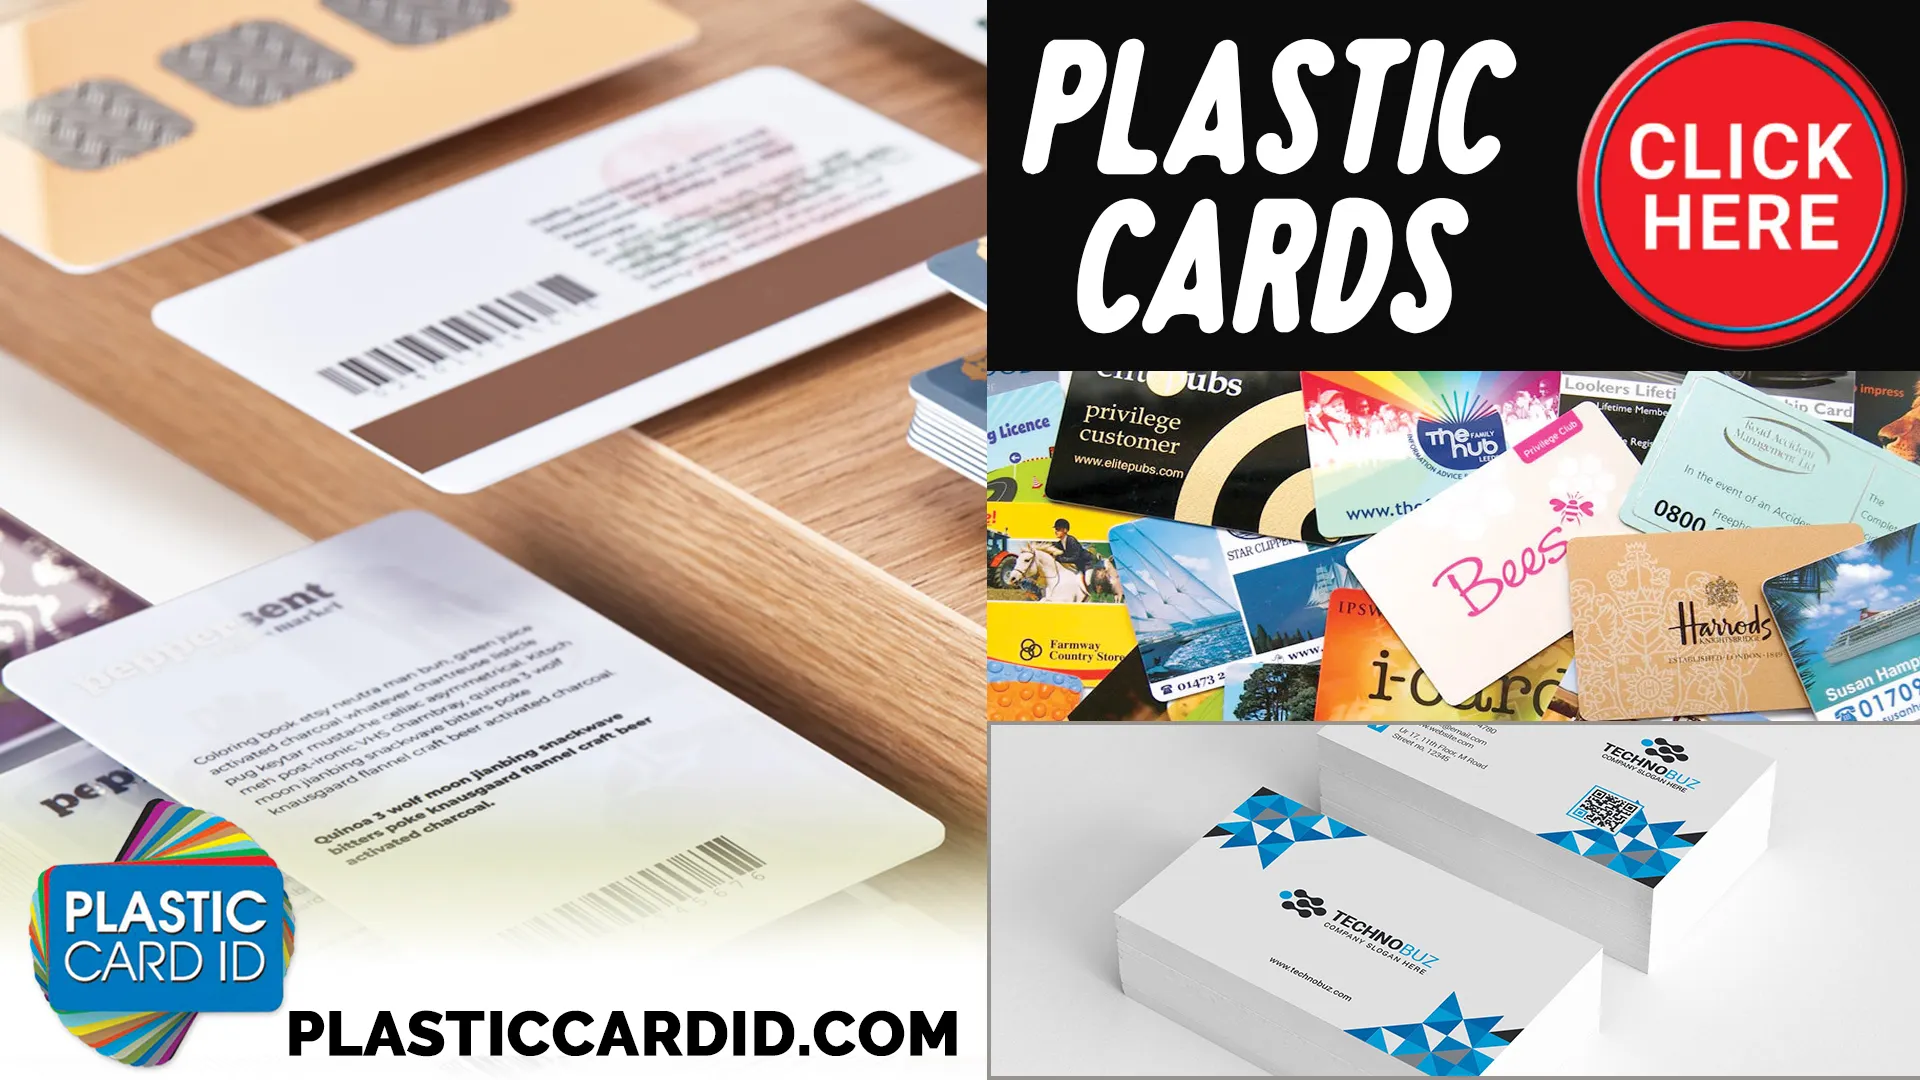 How Are Biodegradable Plastic Cards Made?